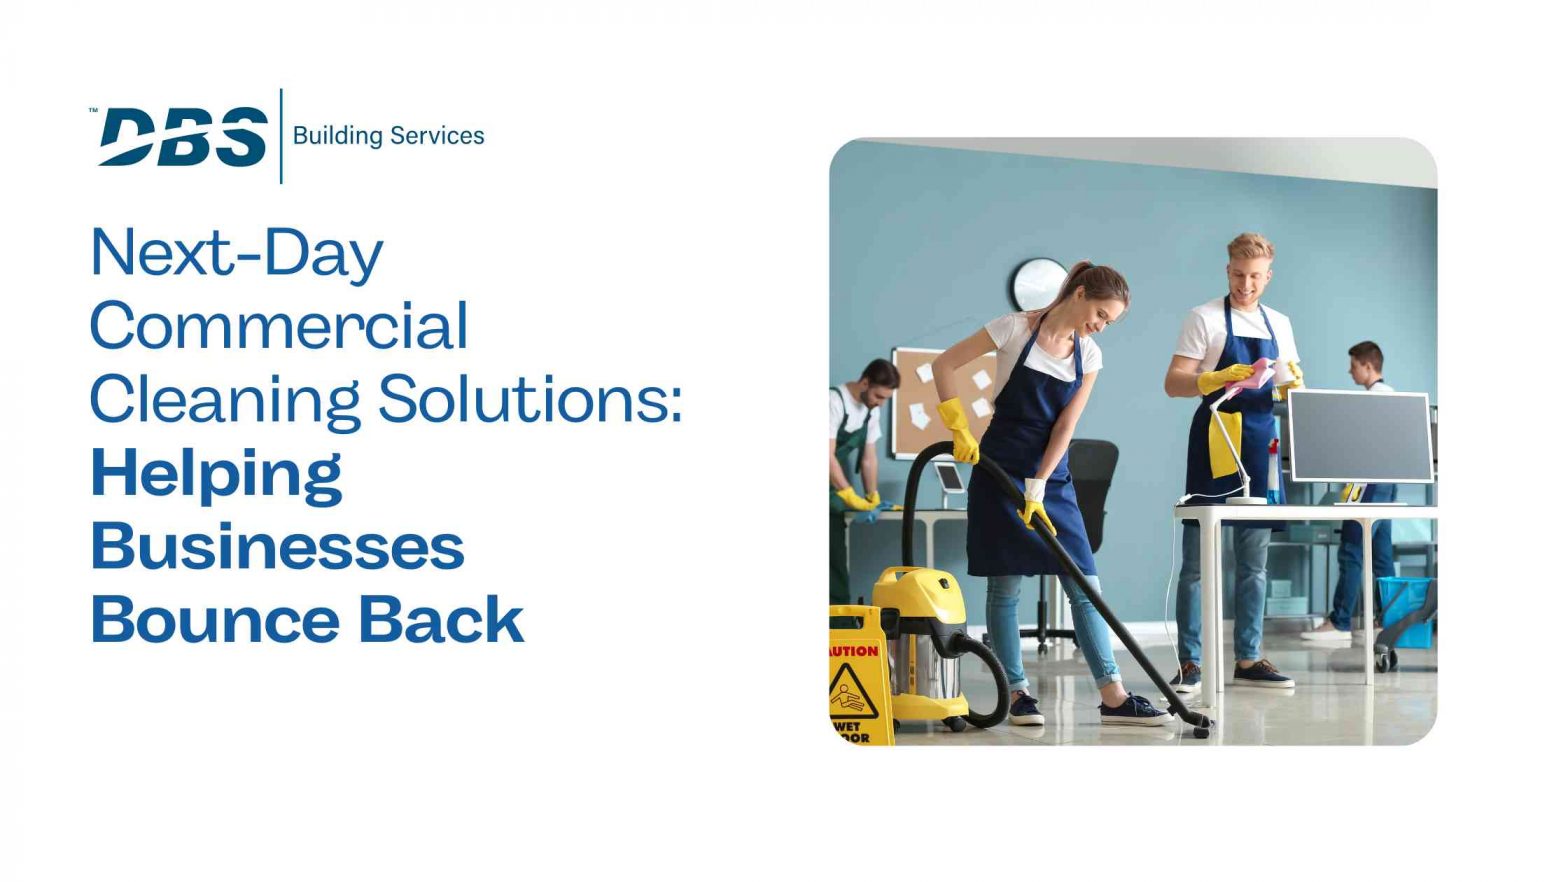 Next-day commercial cleaning solutions